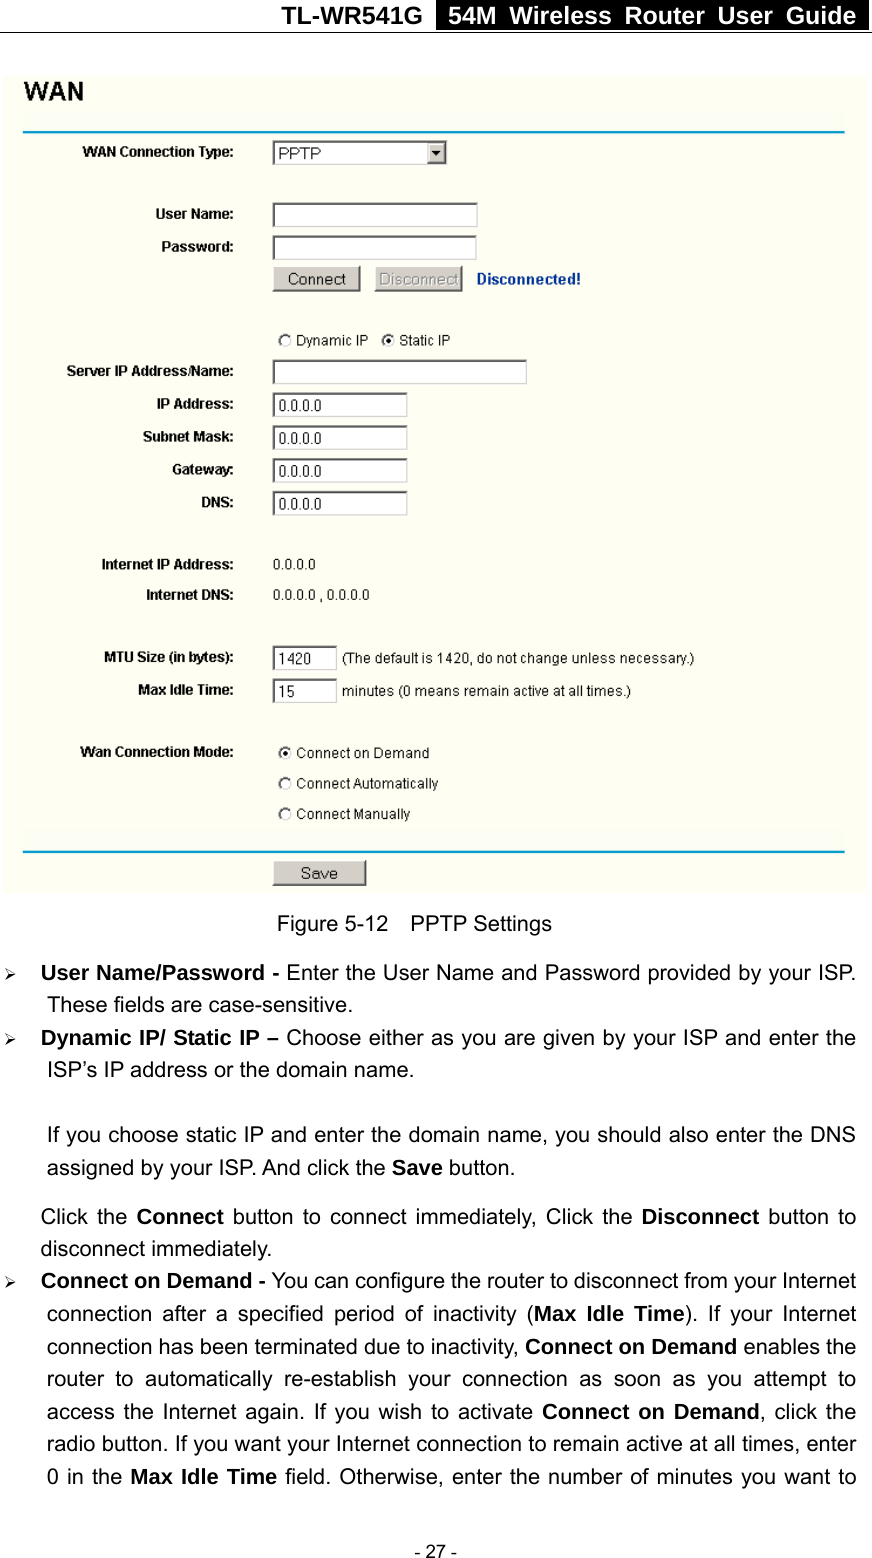 TL-WR541G   54M Wireless Router User Guide   Figure 5-12  PPTP Settings ¾ User Name/Password - Enter the User Name and Password provided by your ISP. These fields are case-sensitive. ¾ Dynamic IP/ Static IP – Choose either as you are given by your ISP and enter the ISP’s IP address or the domain name.  If you choose static IP and enter the domain name, you should also enter the DNS assigned by your ISP. And click the Save button. Click the Connect button to connect immediately, Click the Disconnect button to disconnect immediately. ¾ Connect on Demand - You can configure the router to disconnect from your Internet connection after a specified period of inactivity (Max Idle Time). If your Internet connection has been terminated due to inactivity, Connect on Demand enables the router to automatically re-establish your connection as soon as you attempt to access the Internet again. If you wish to activate Connect on Demand, click the radio button. If you want your Internet connection to remain active at all times, enter 0 in the Max Idle Time field. Otherwise, enter the number of minutes you want to  - 27 - 